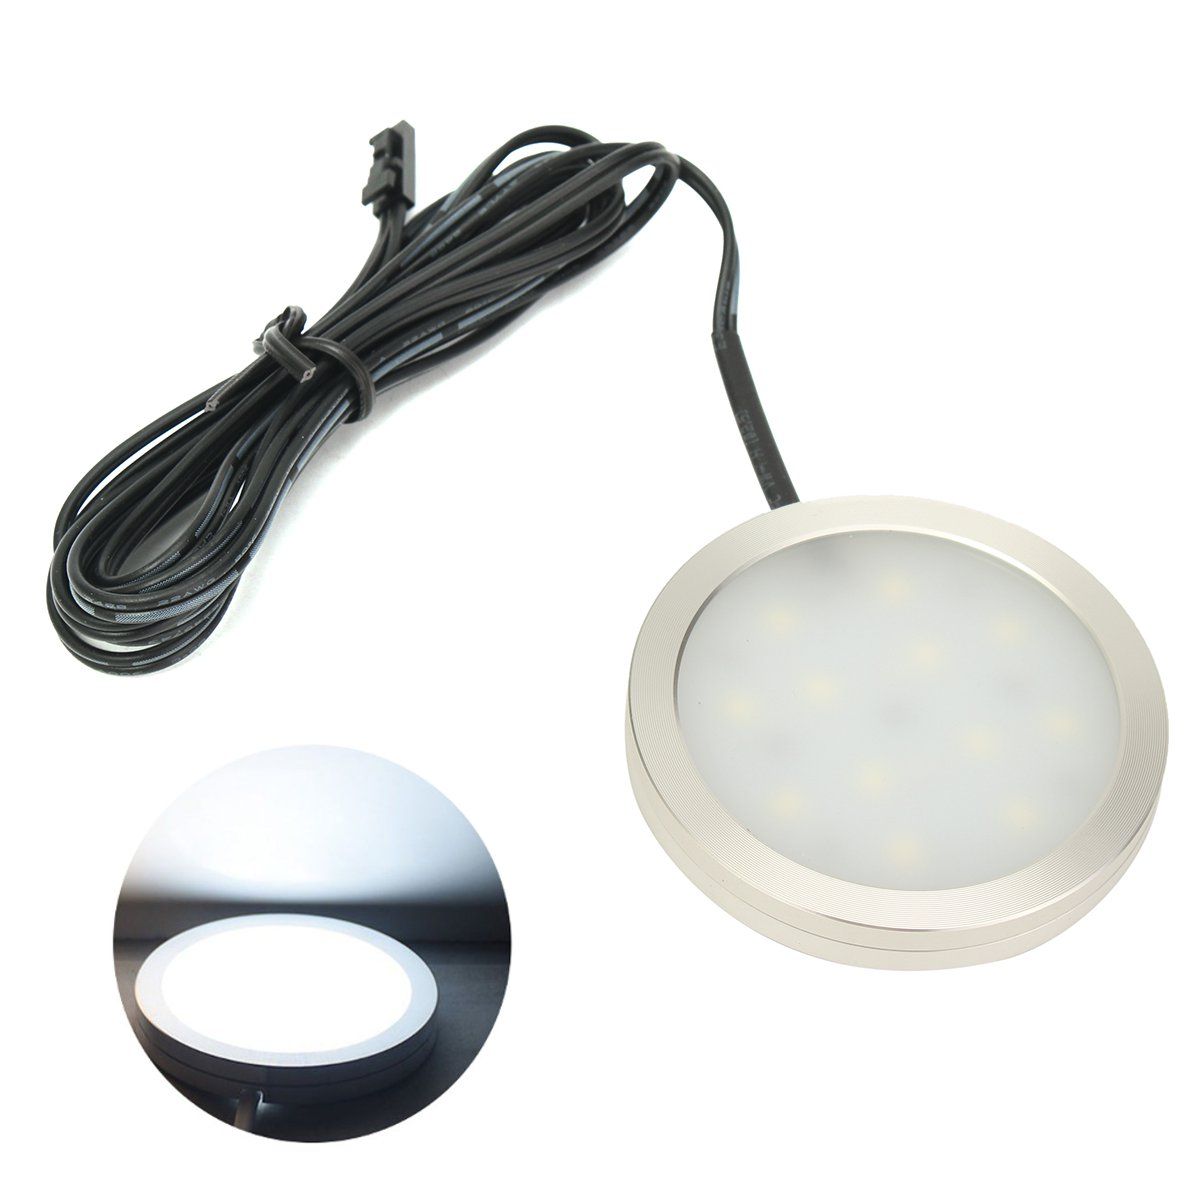 8PCS-LED-Cabinet-Light-White-Dimmable-Kitchen-Counter-Under-Puck-RF-Wireless-Remote-Control--Power-S-1682682